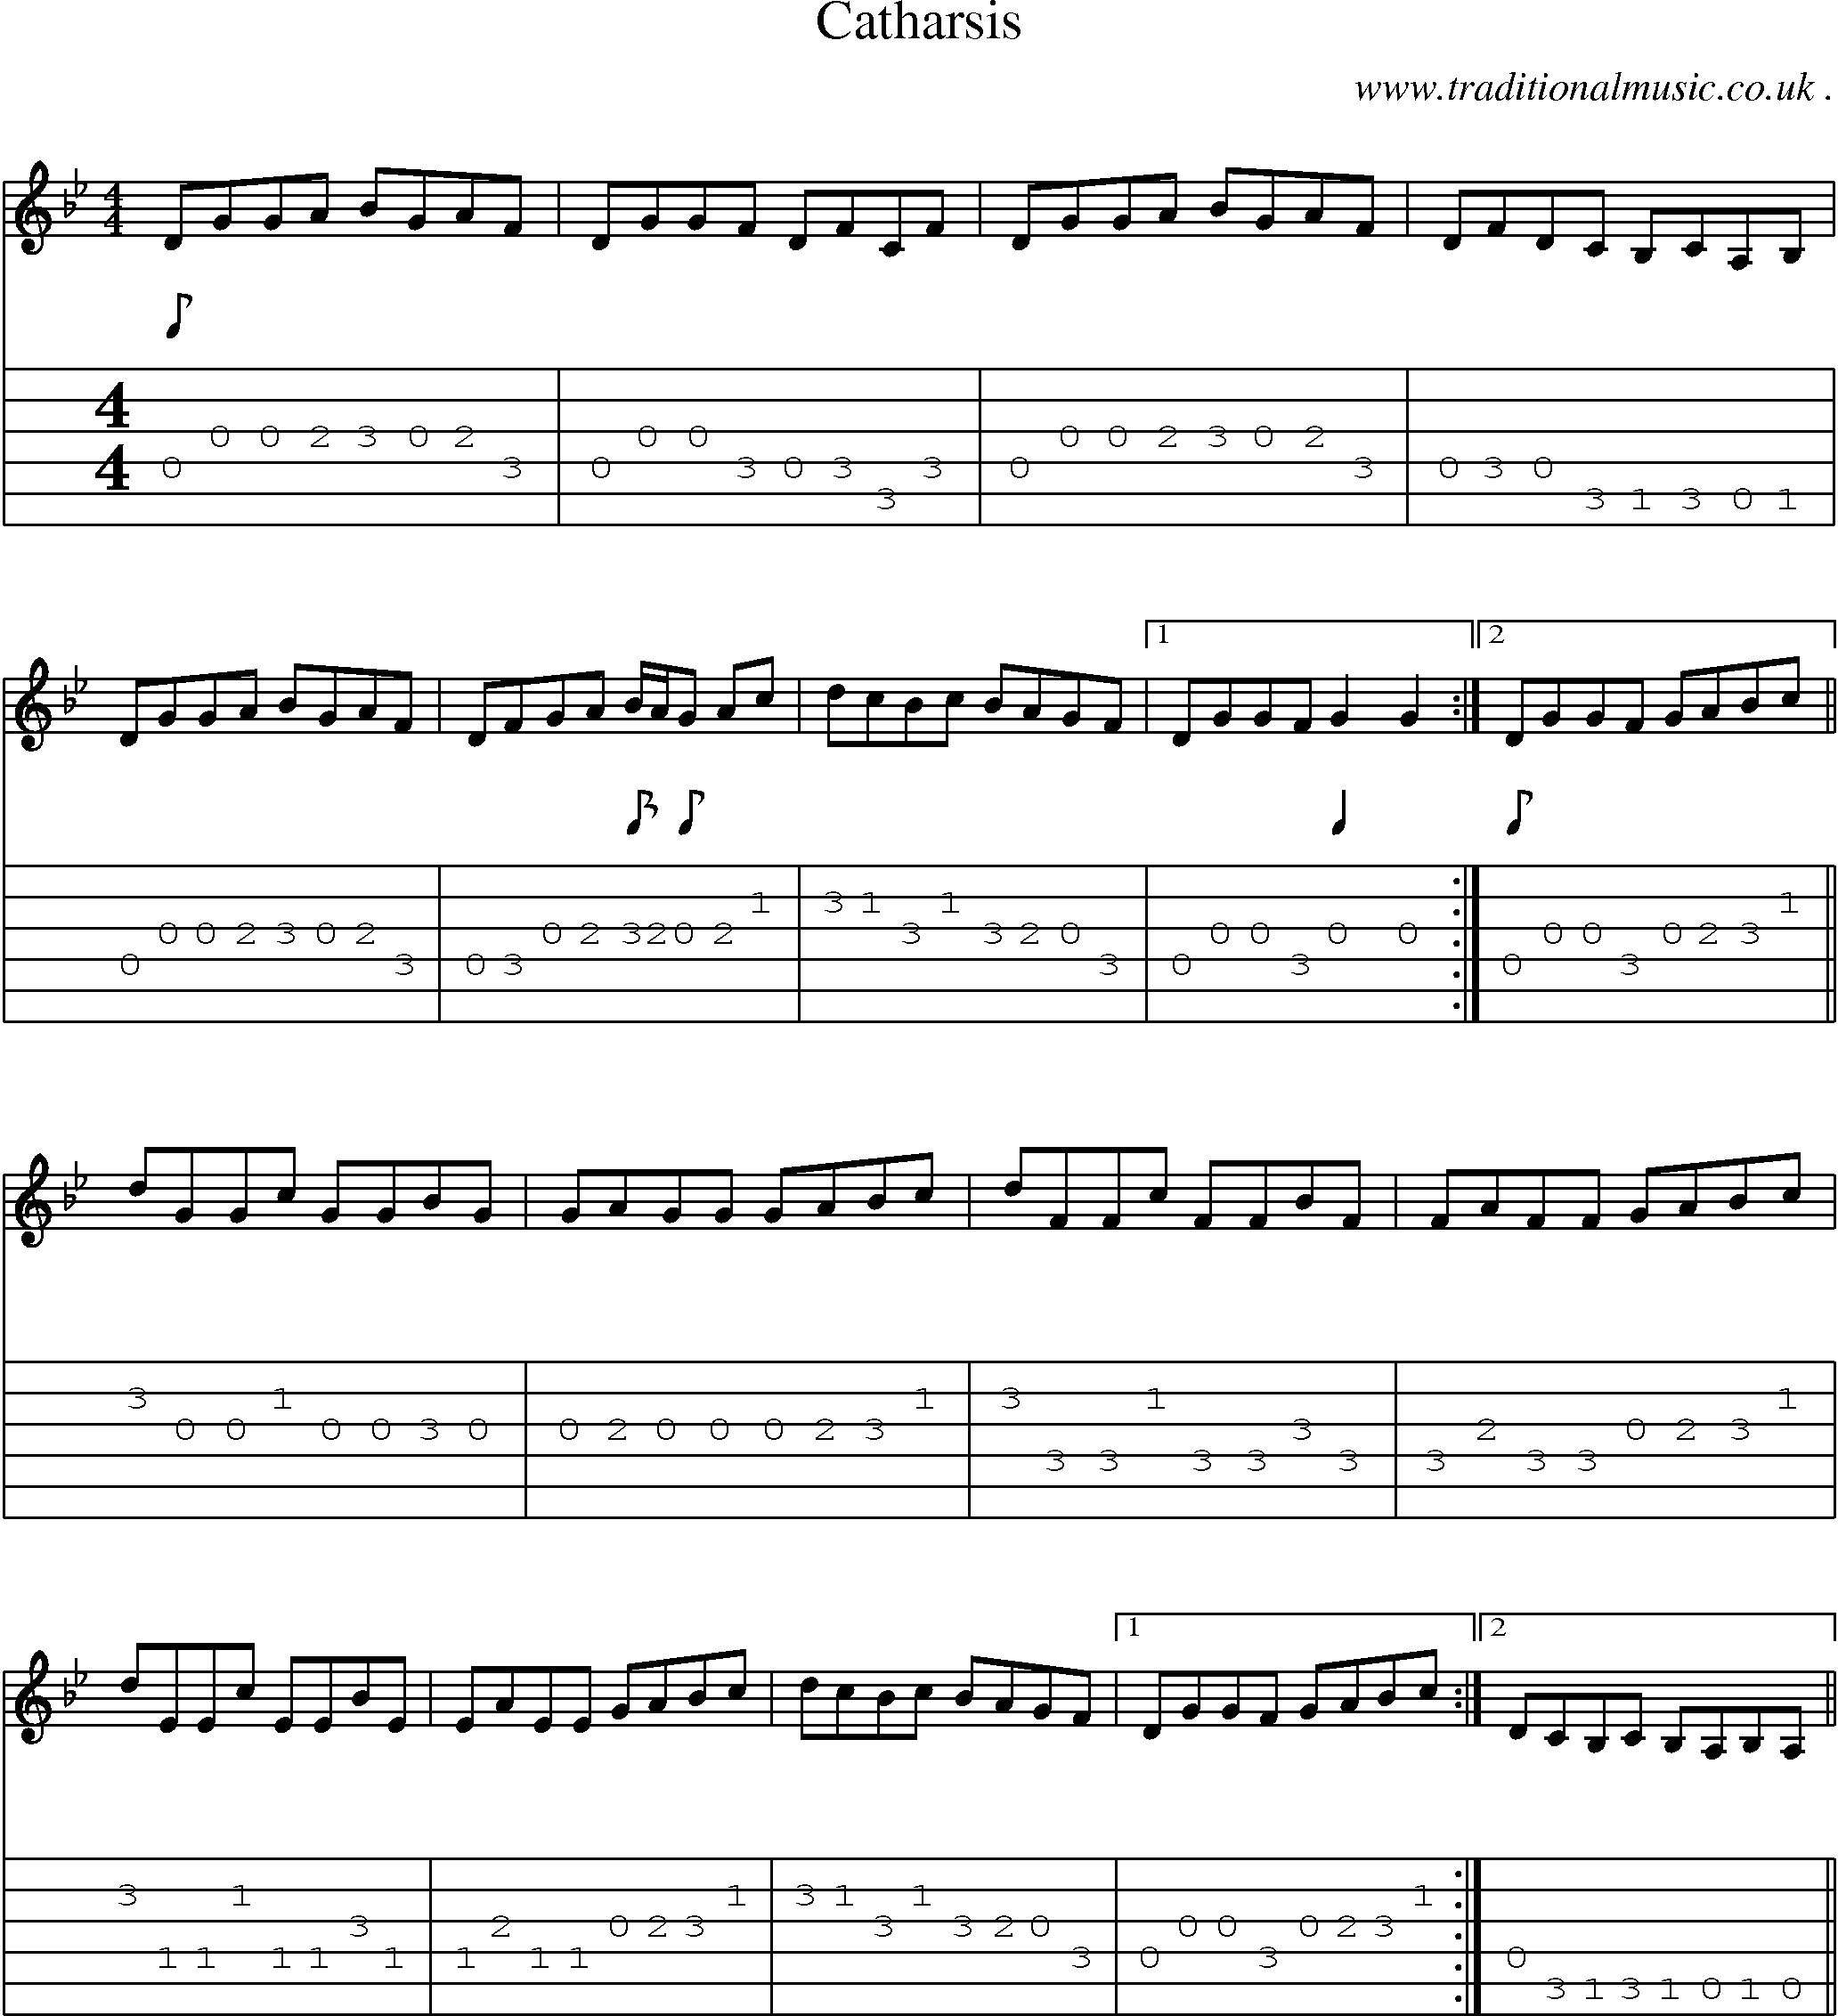 Sheet-music  score, Chords and Guitar Tabs for Catharsis